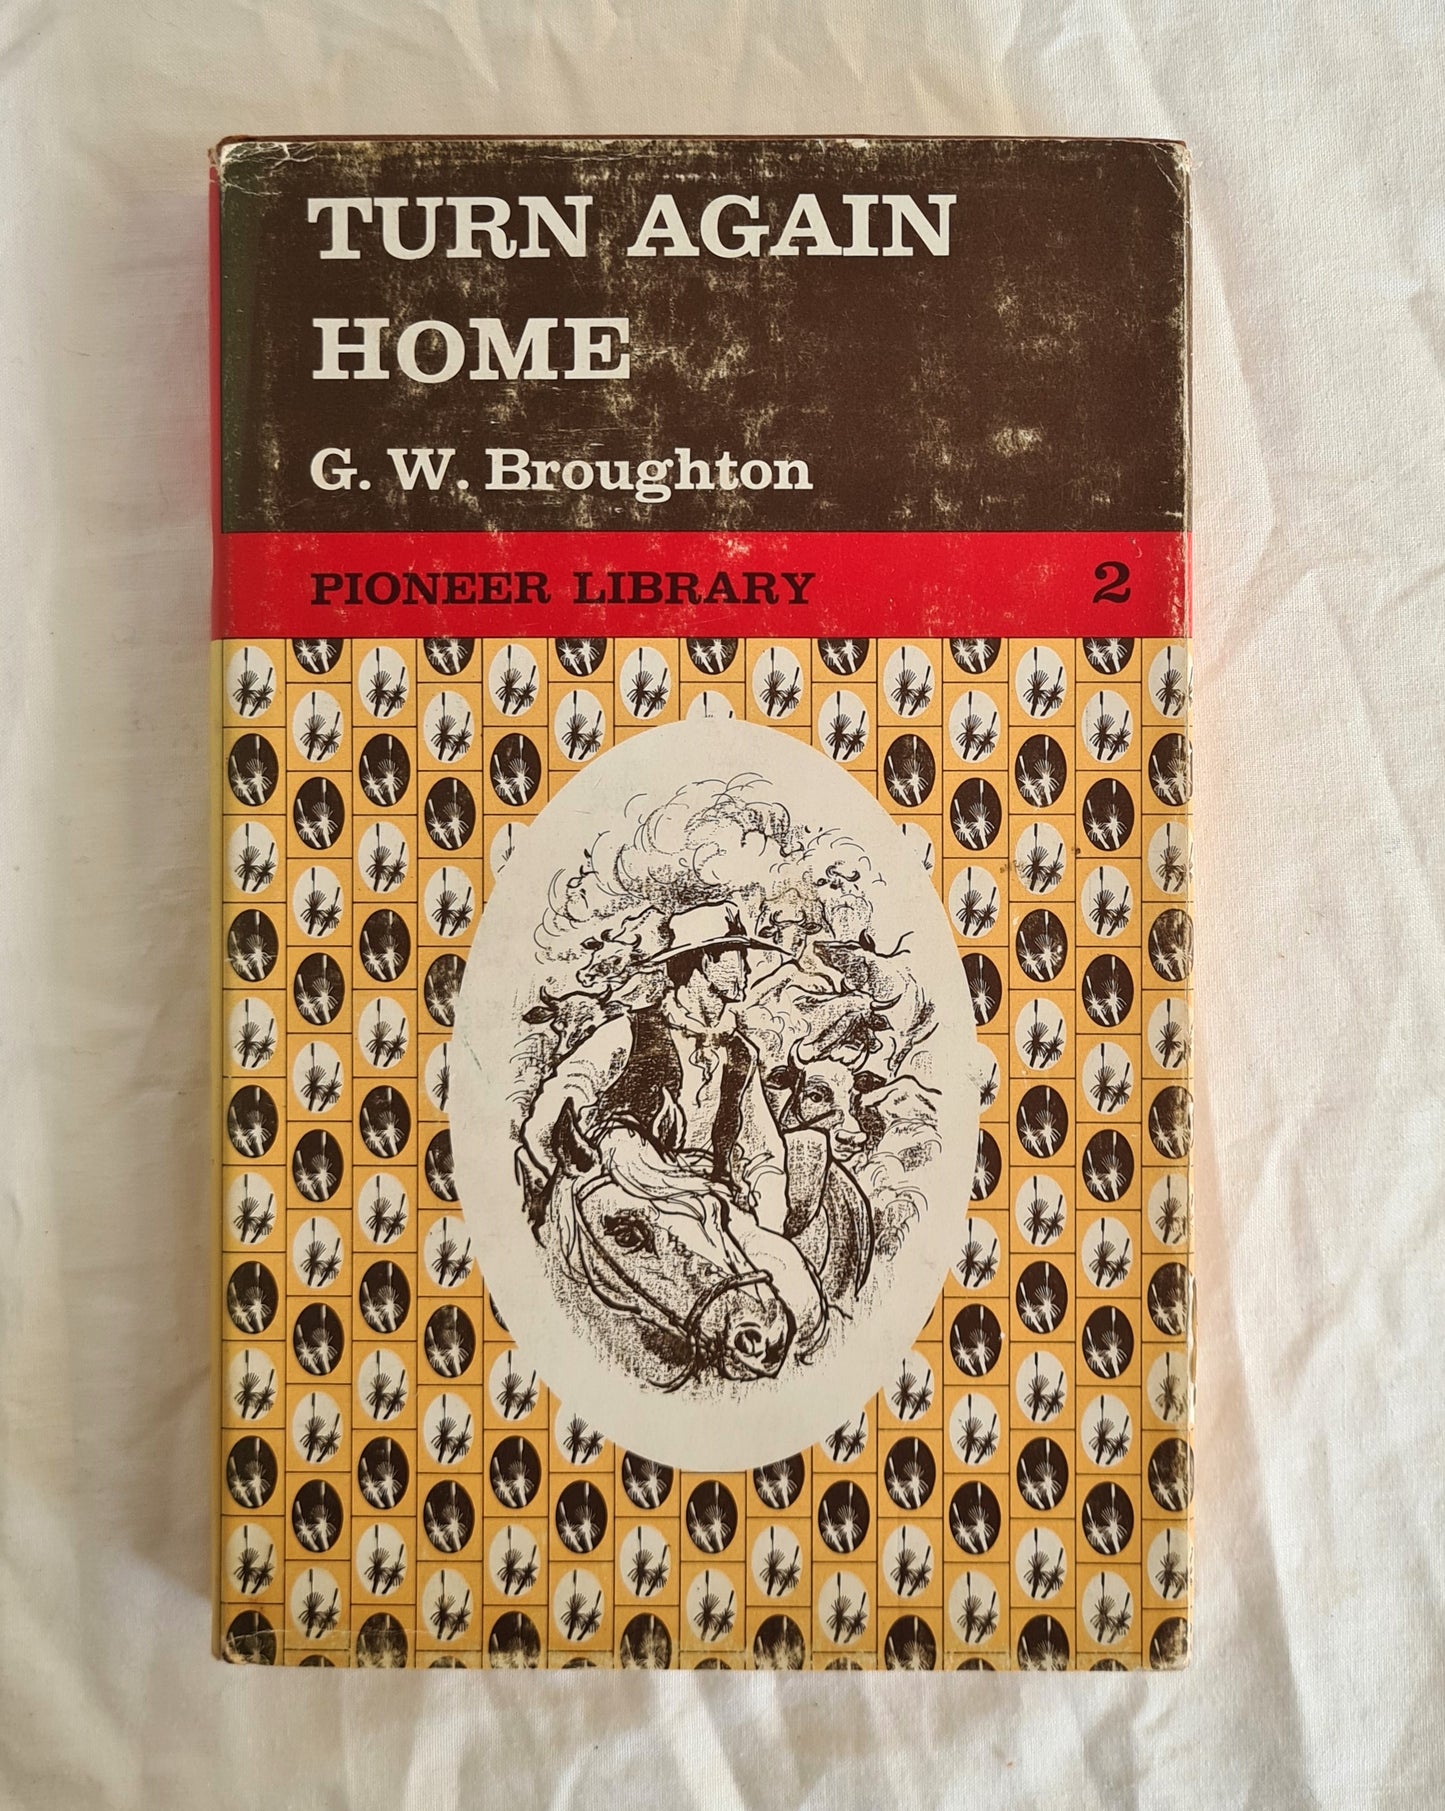 Turn Again Home  by G. W. Broughton  Pioneer Library – Title 2